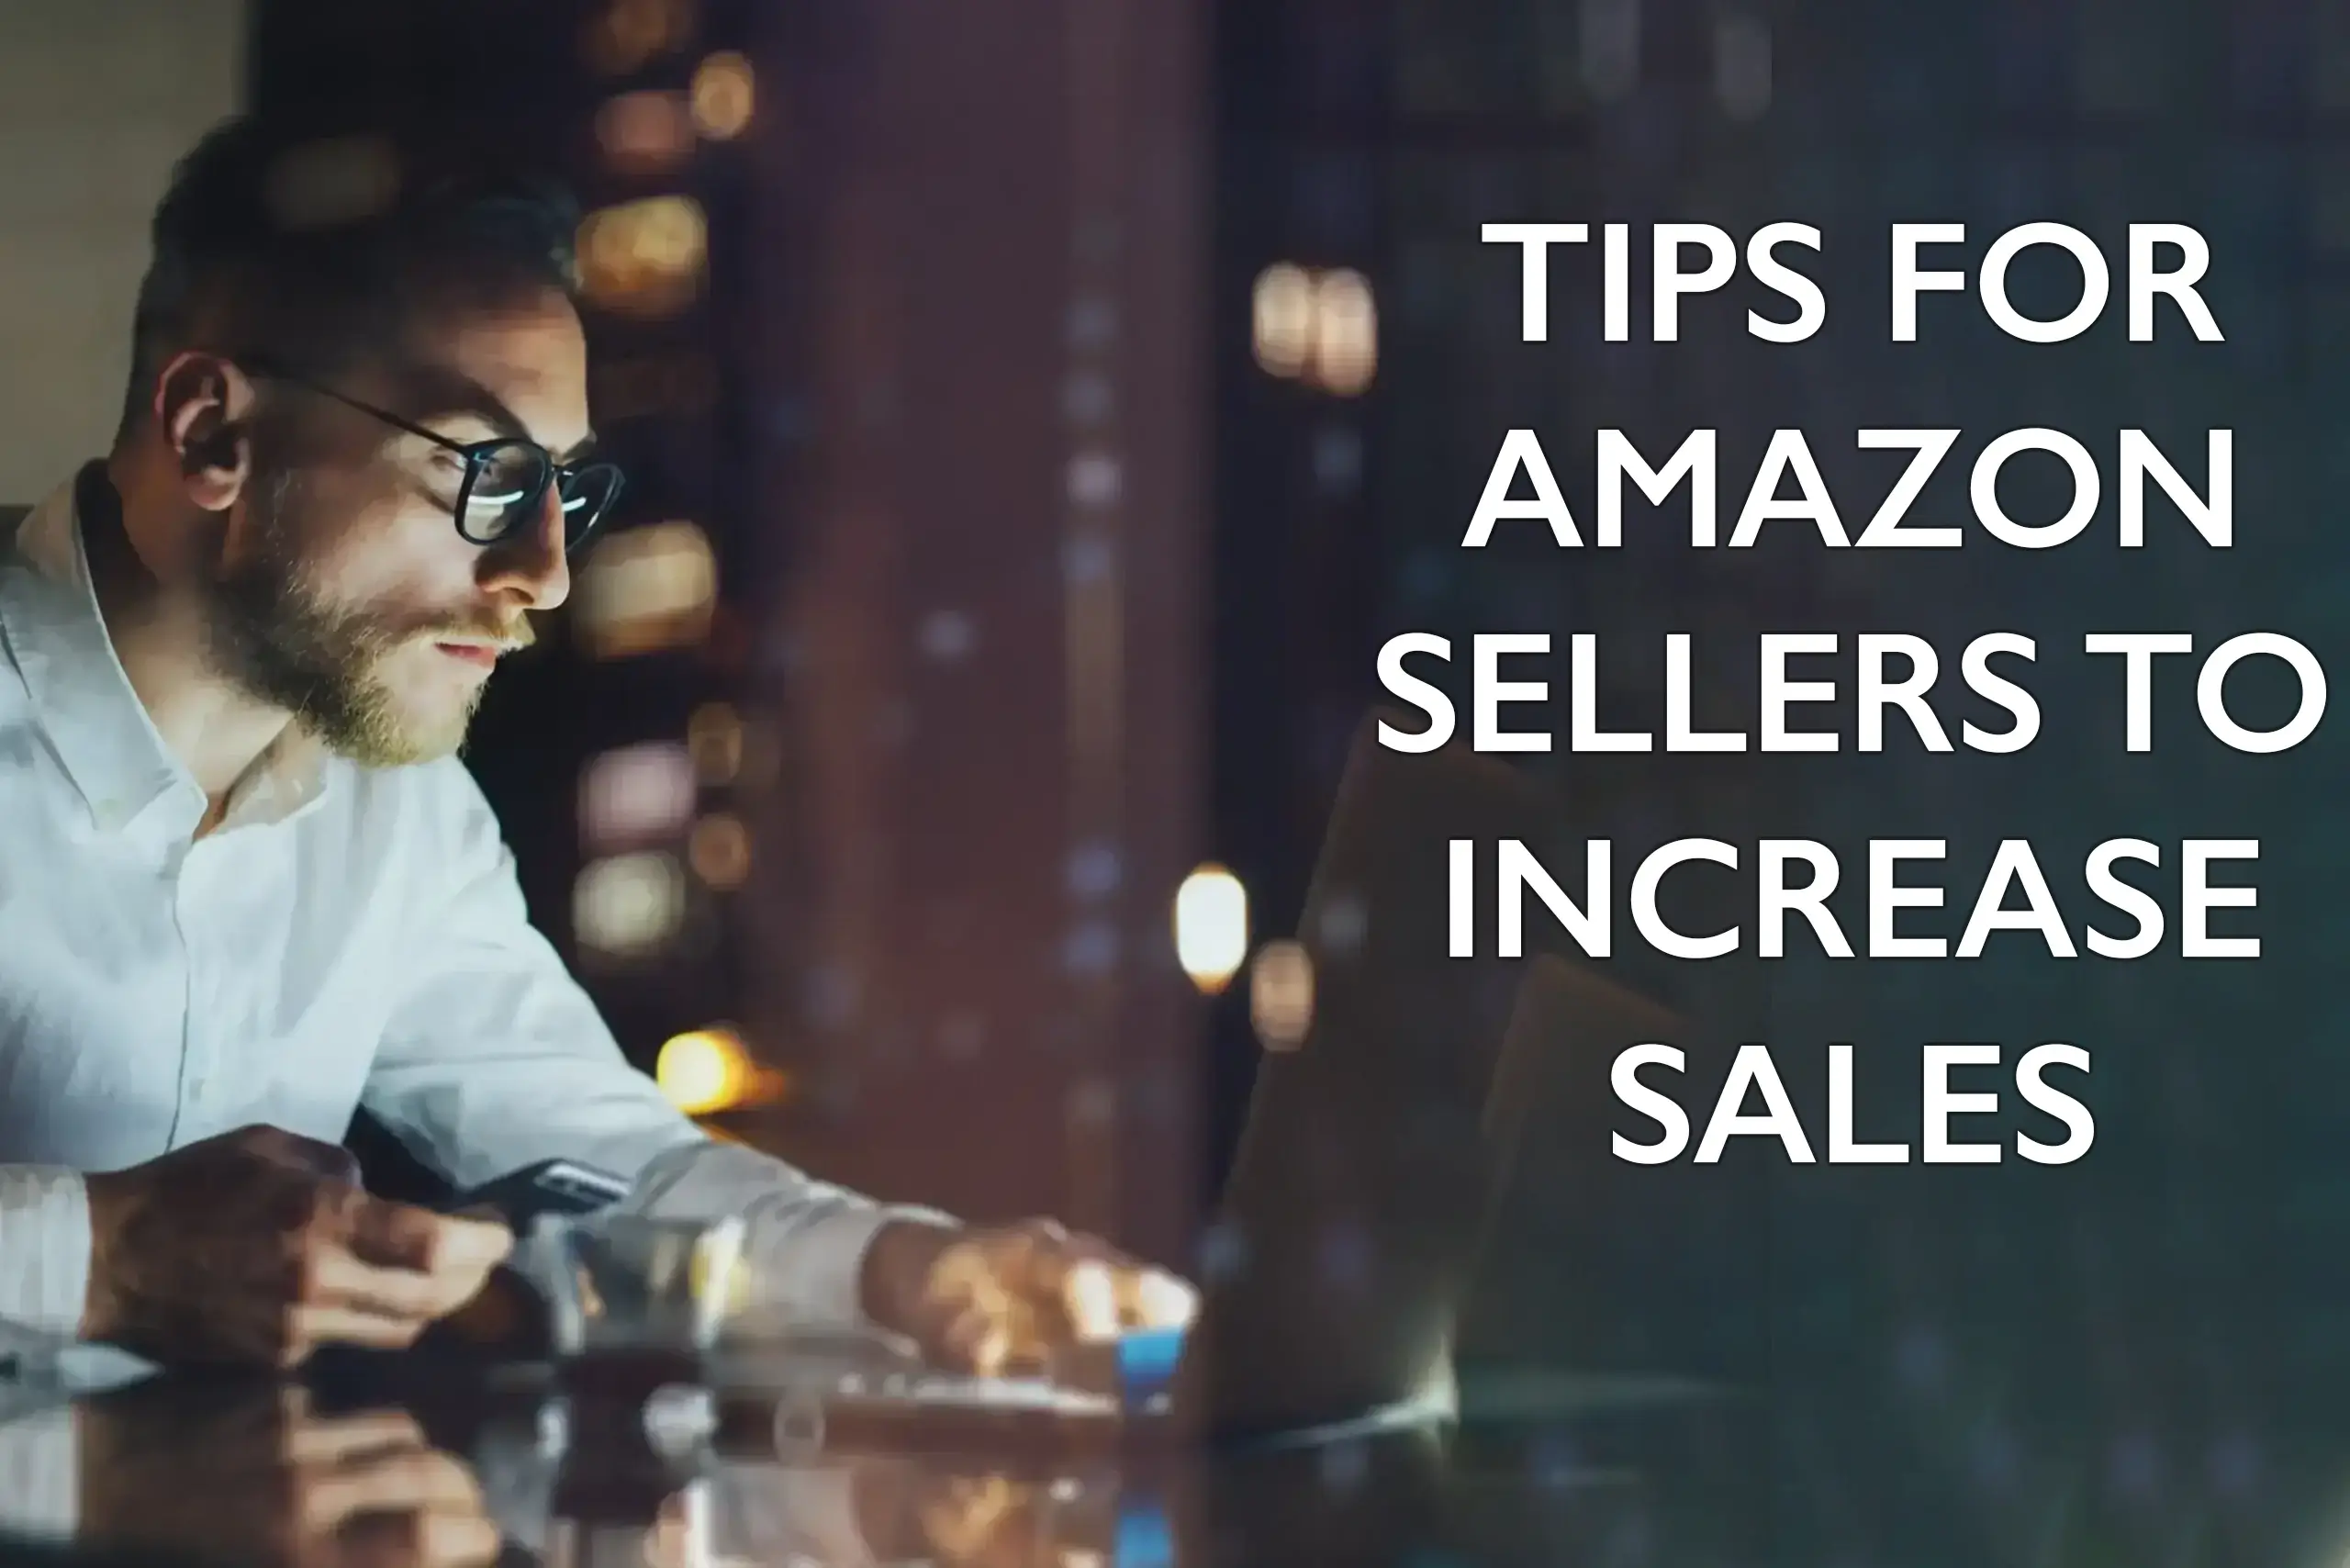 A businessman on his laptop learning about tips for amazon sellers to increase sales.